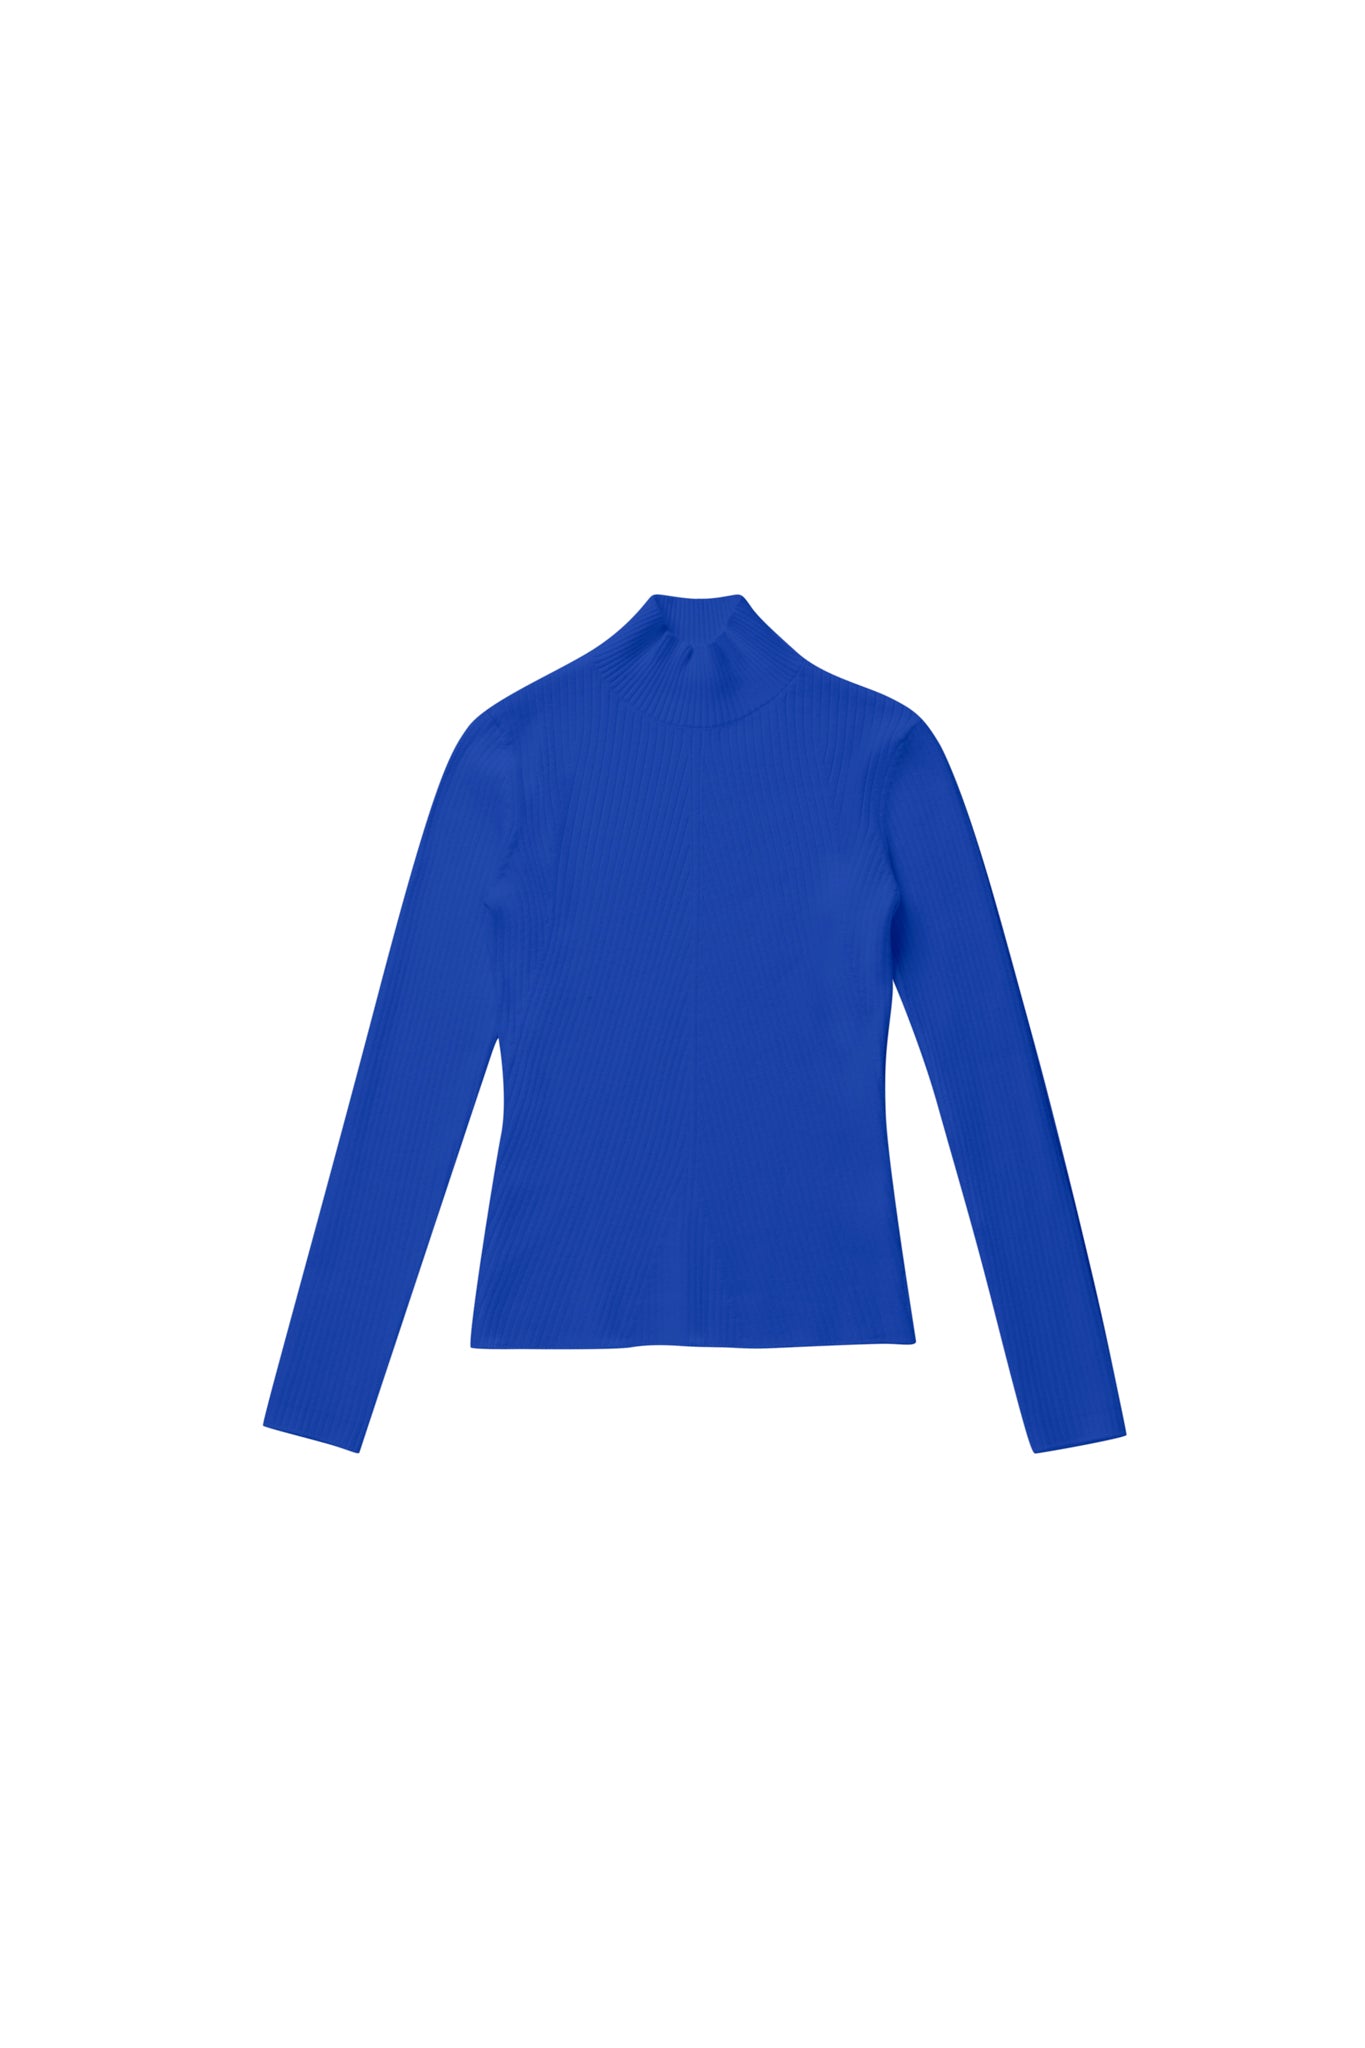 High Neck Sweater in Royal Blue #8131ZK FINAL SALE